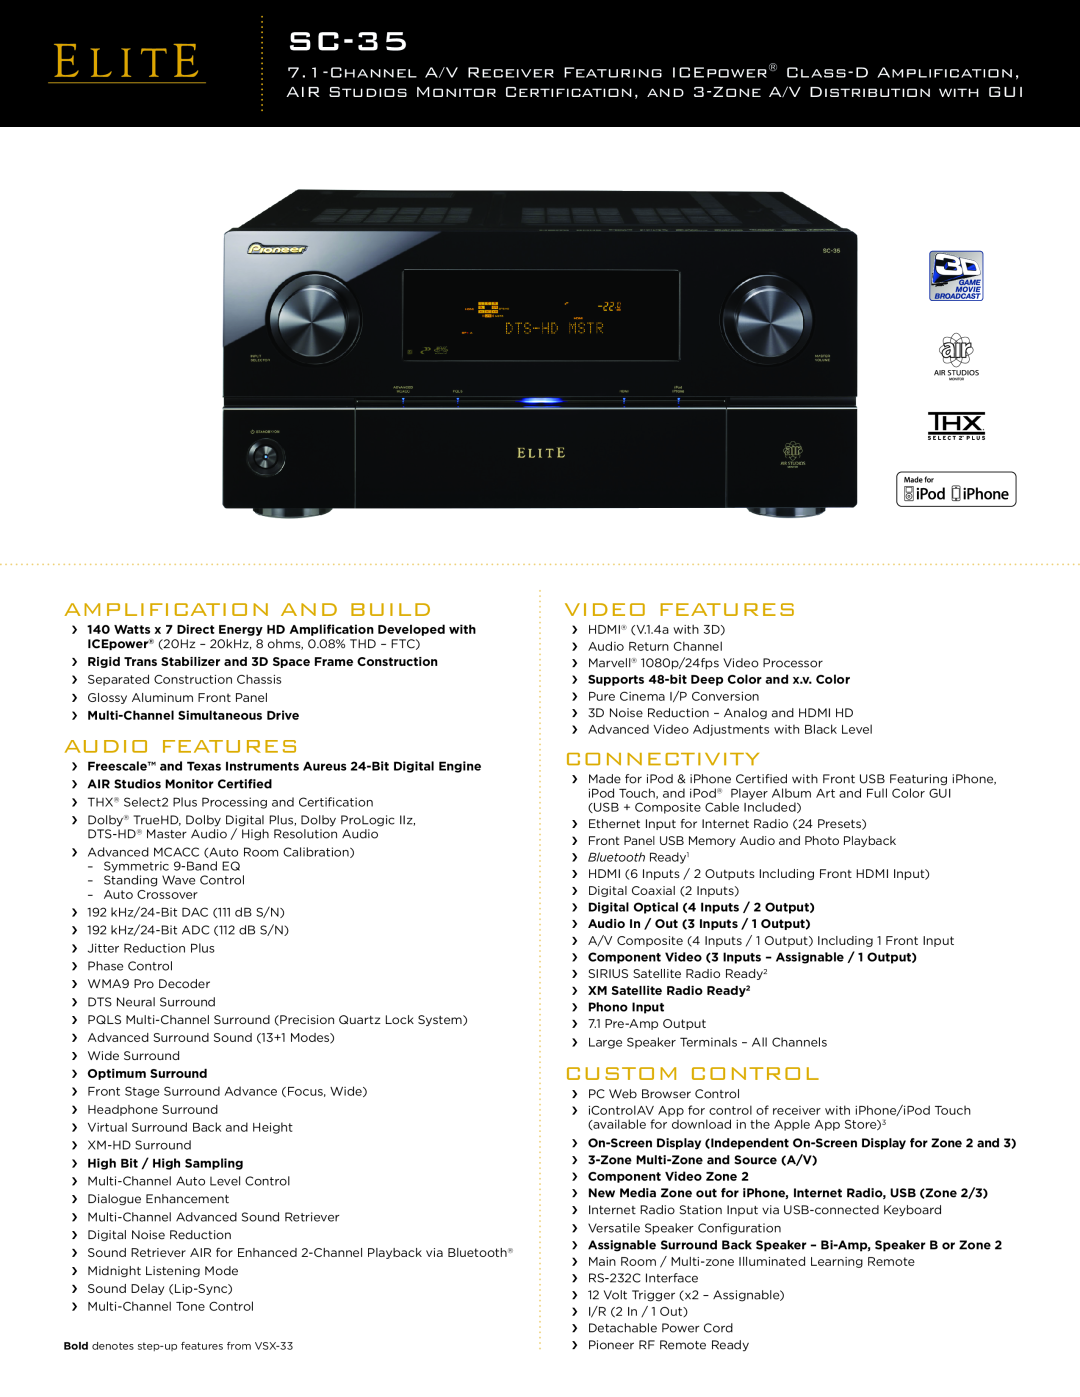 Pioneer SC-35 manual Amplification And Build, Audio Features, Video Features, Connectivity, Custom Control 